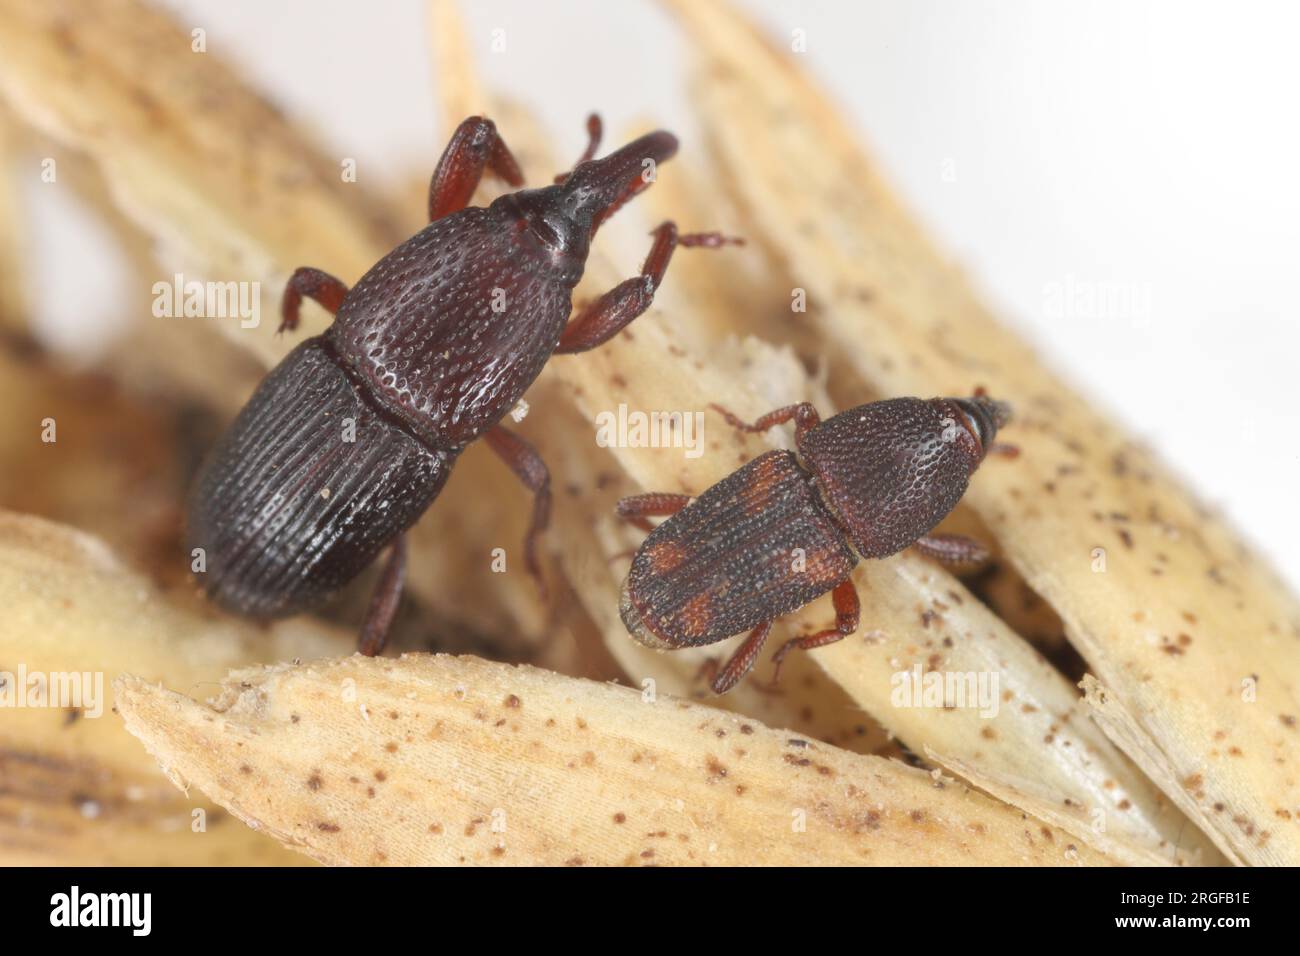 Wheat or granary weevil (Sitophilus granarius), in left and rice weevil (Sitophilus oryzae), on a fragment of an ear of cereal. Stock Photo